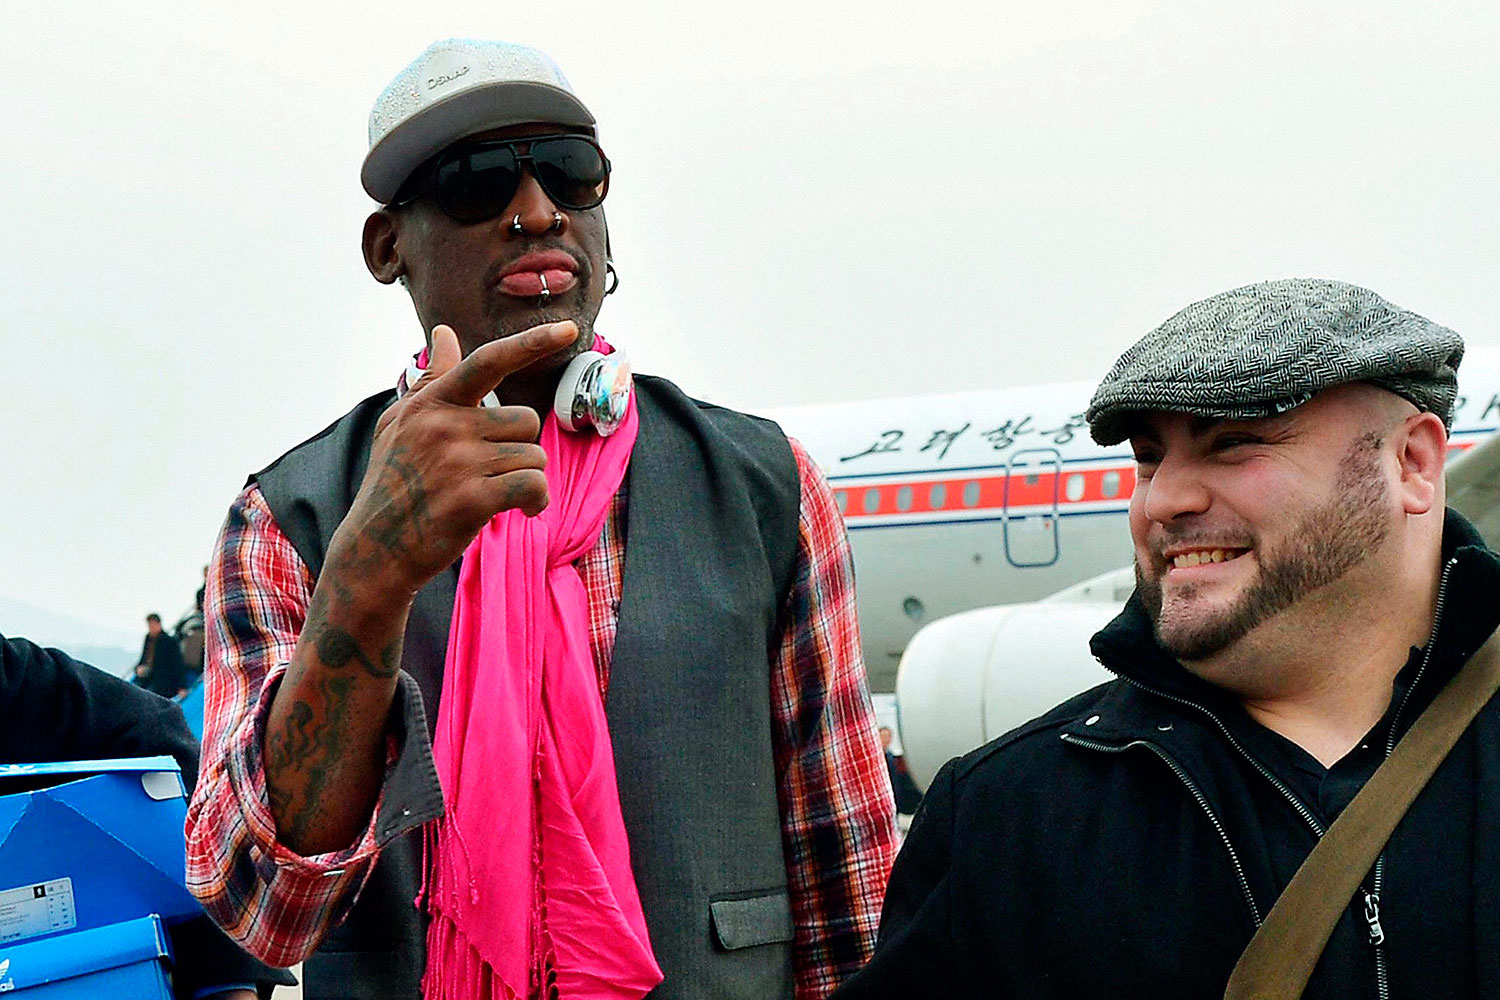 Former NBA basketball star Dennis Rodman (L) arrives at Pyongyang airport in Pyongyang, in this photo released by Kyodo Jan. 6, 2014 (Kyodo / Reuters)